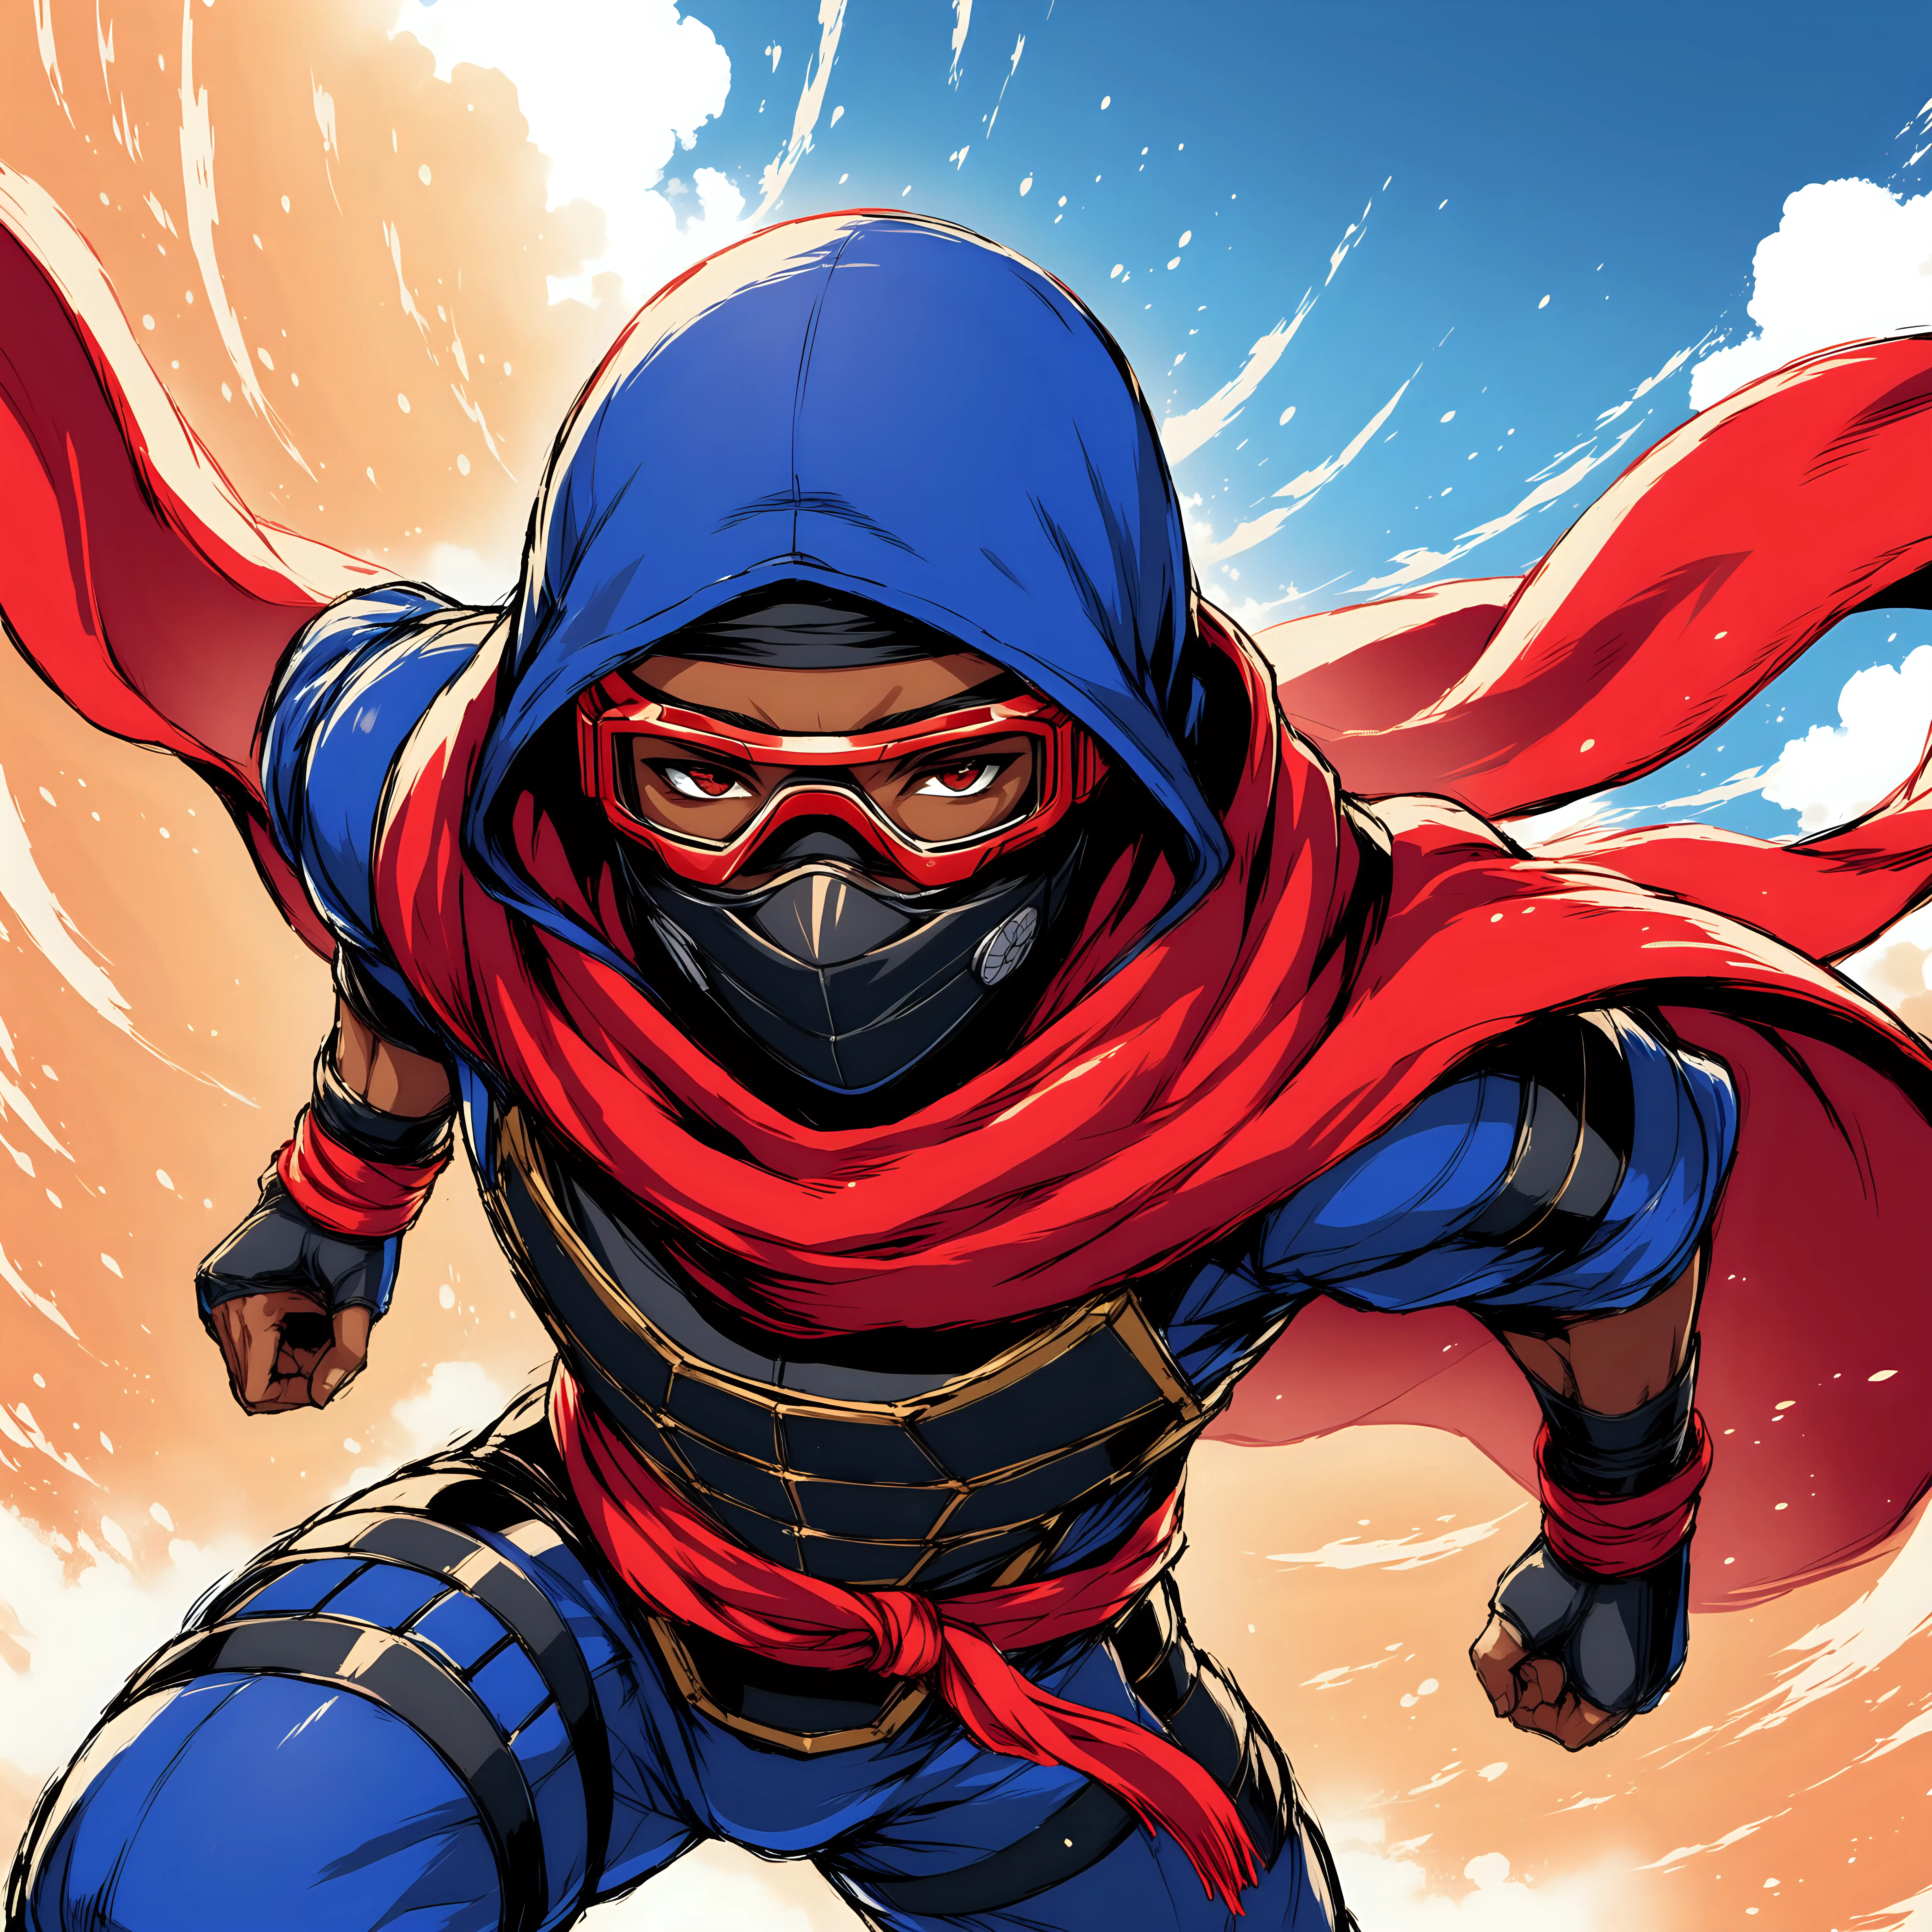 A ninja in royal blue ninja armor. He is African American. He has a long scarlet red scarf that covers the lower half of his face. He has goggles that look like ski goggles on his eyes. He has super speed as a superpower 